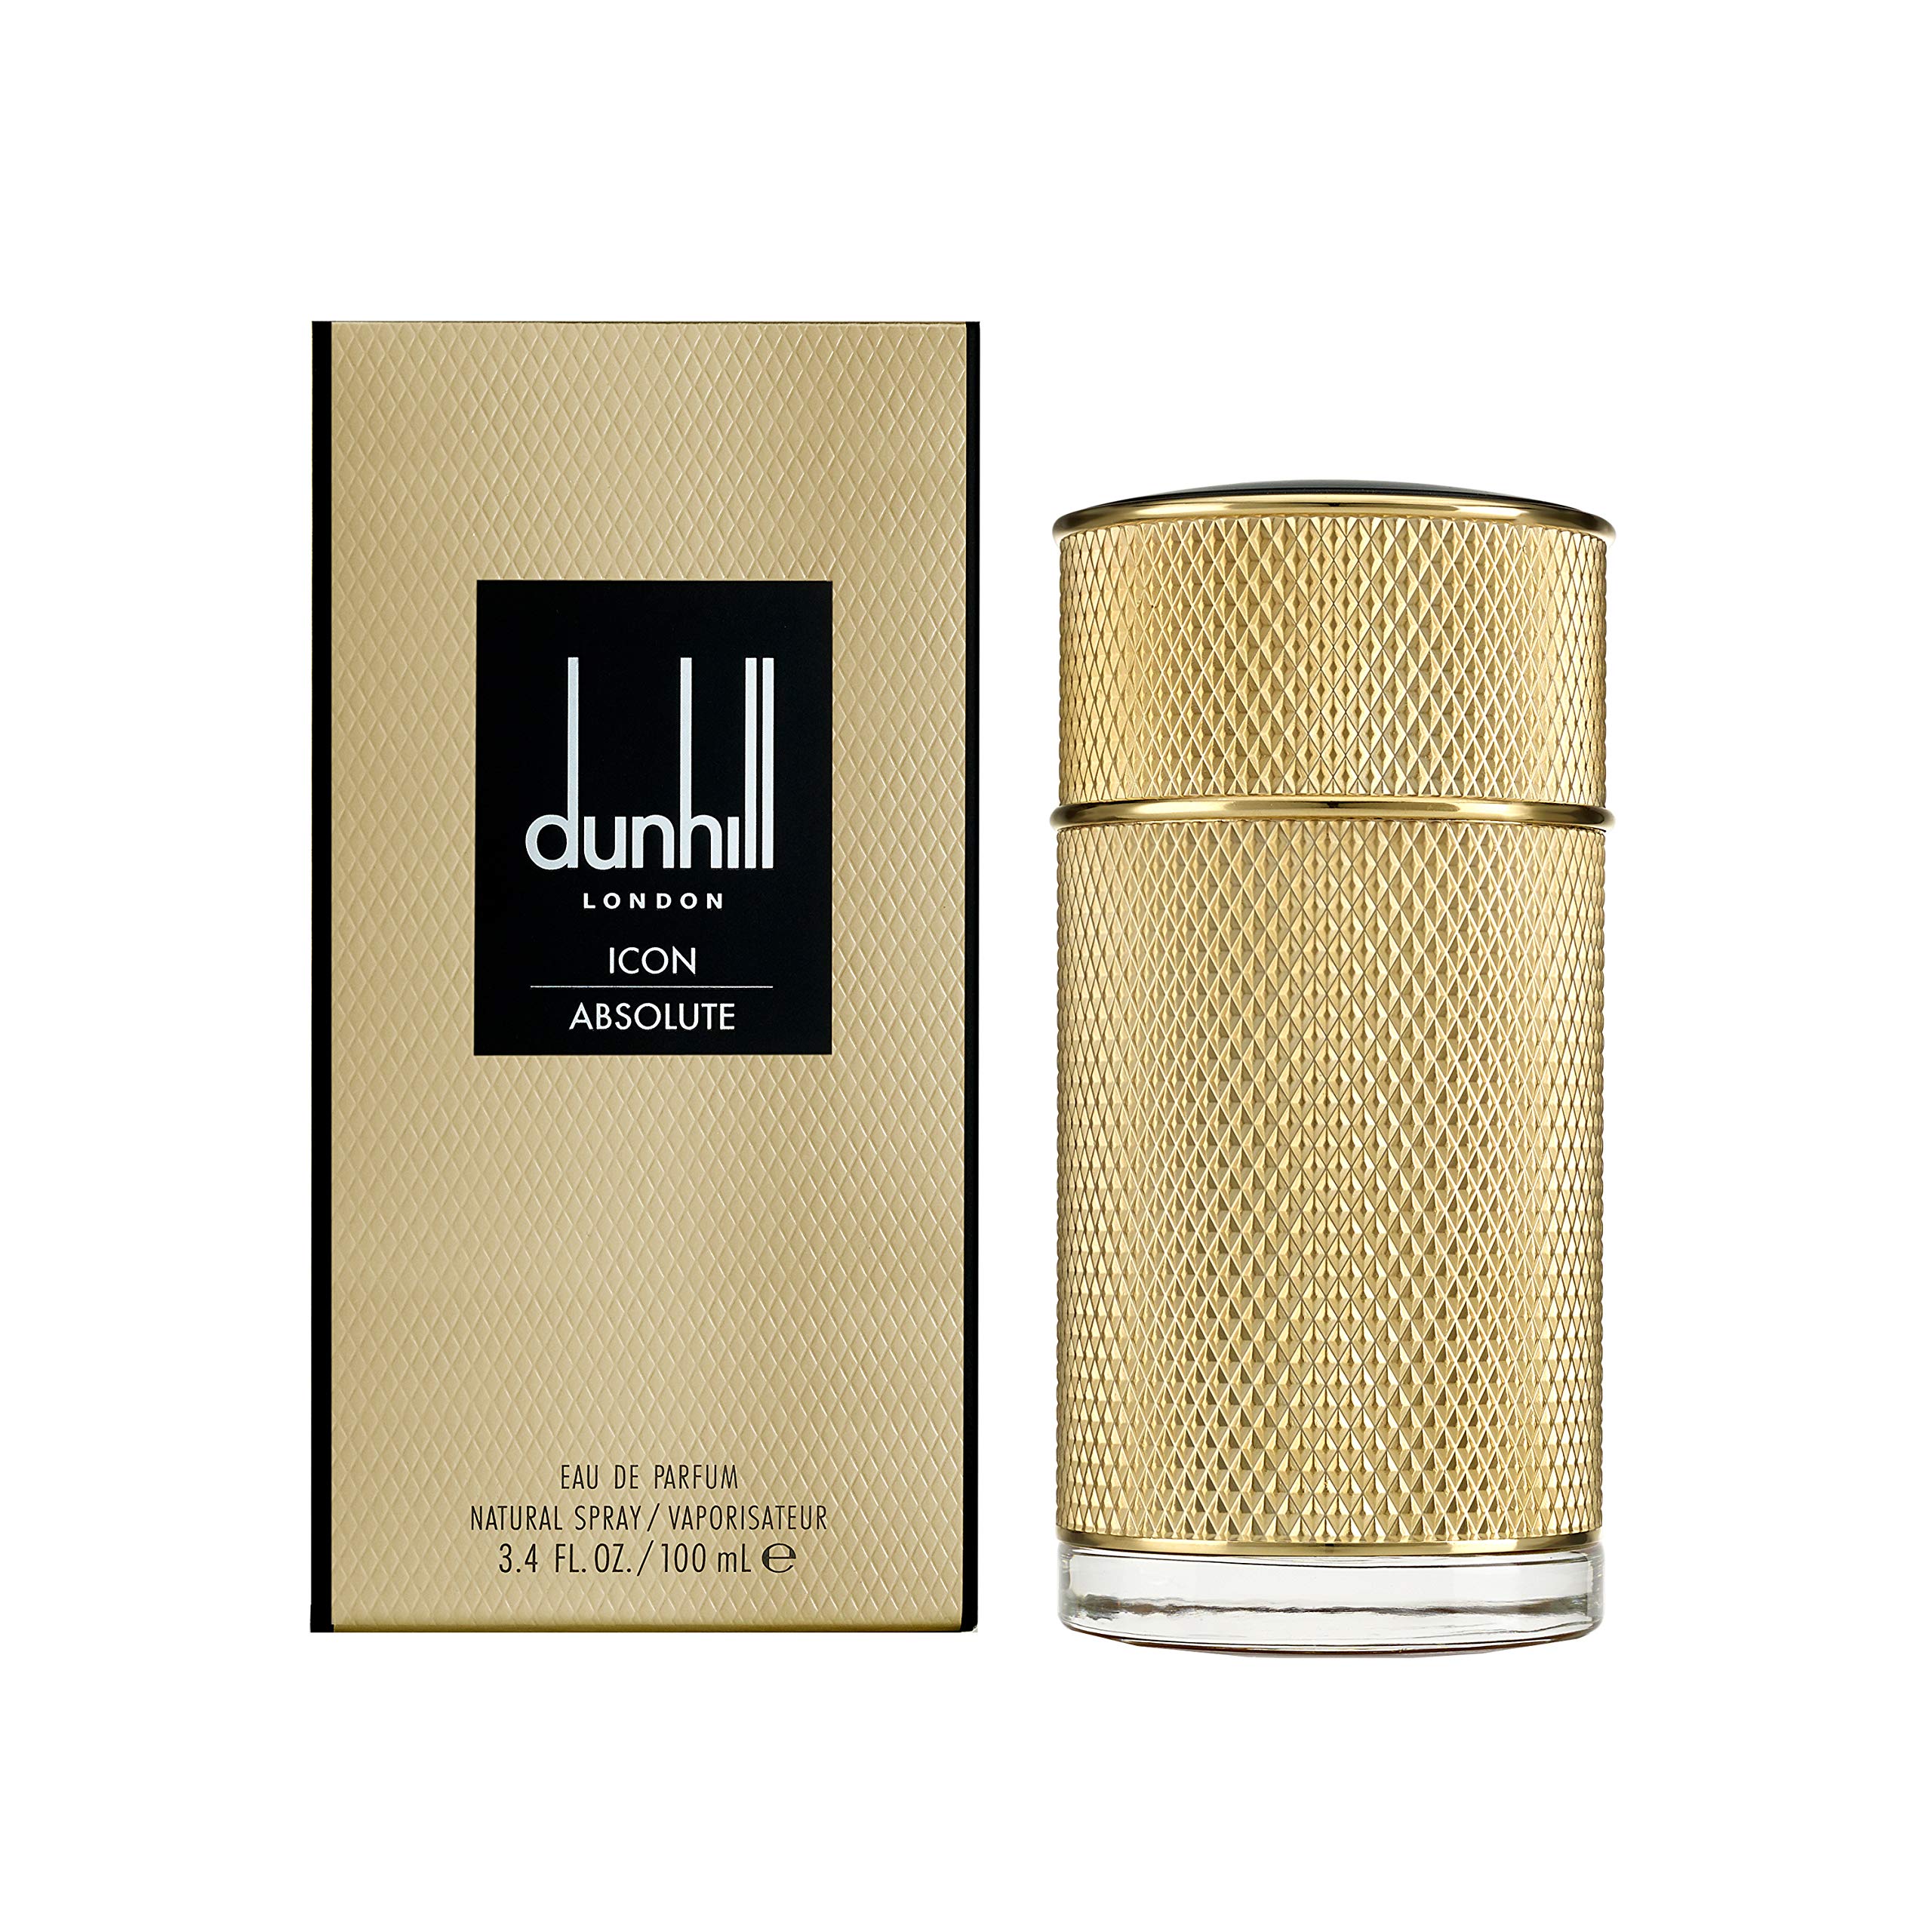 Dunhill ICON ABSOLUTE EDP M